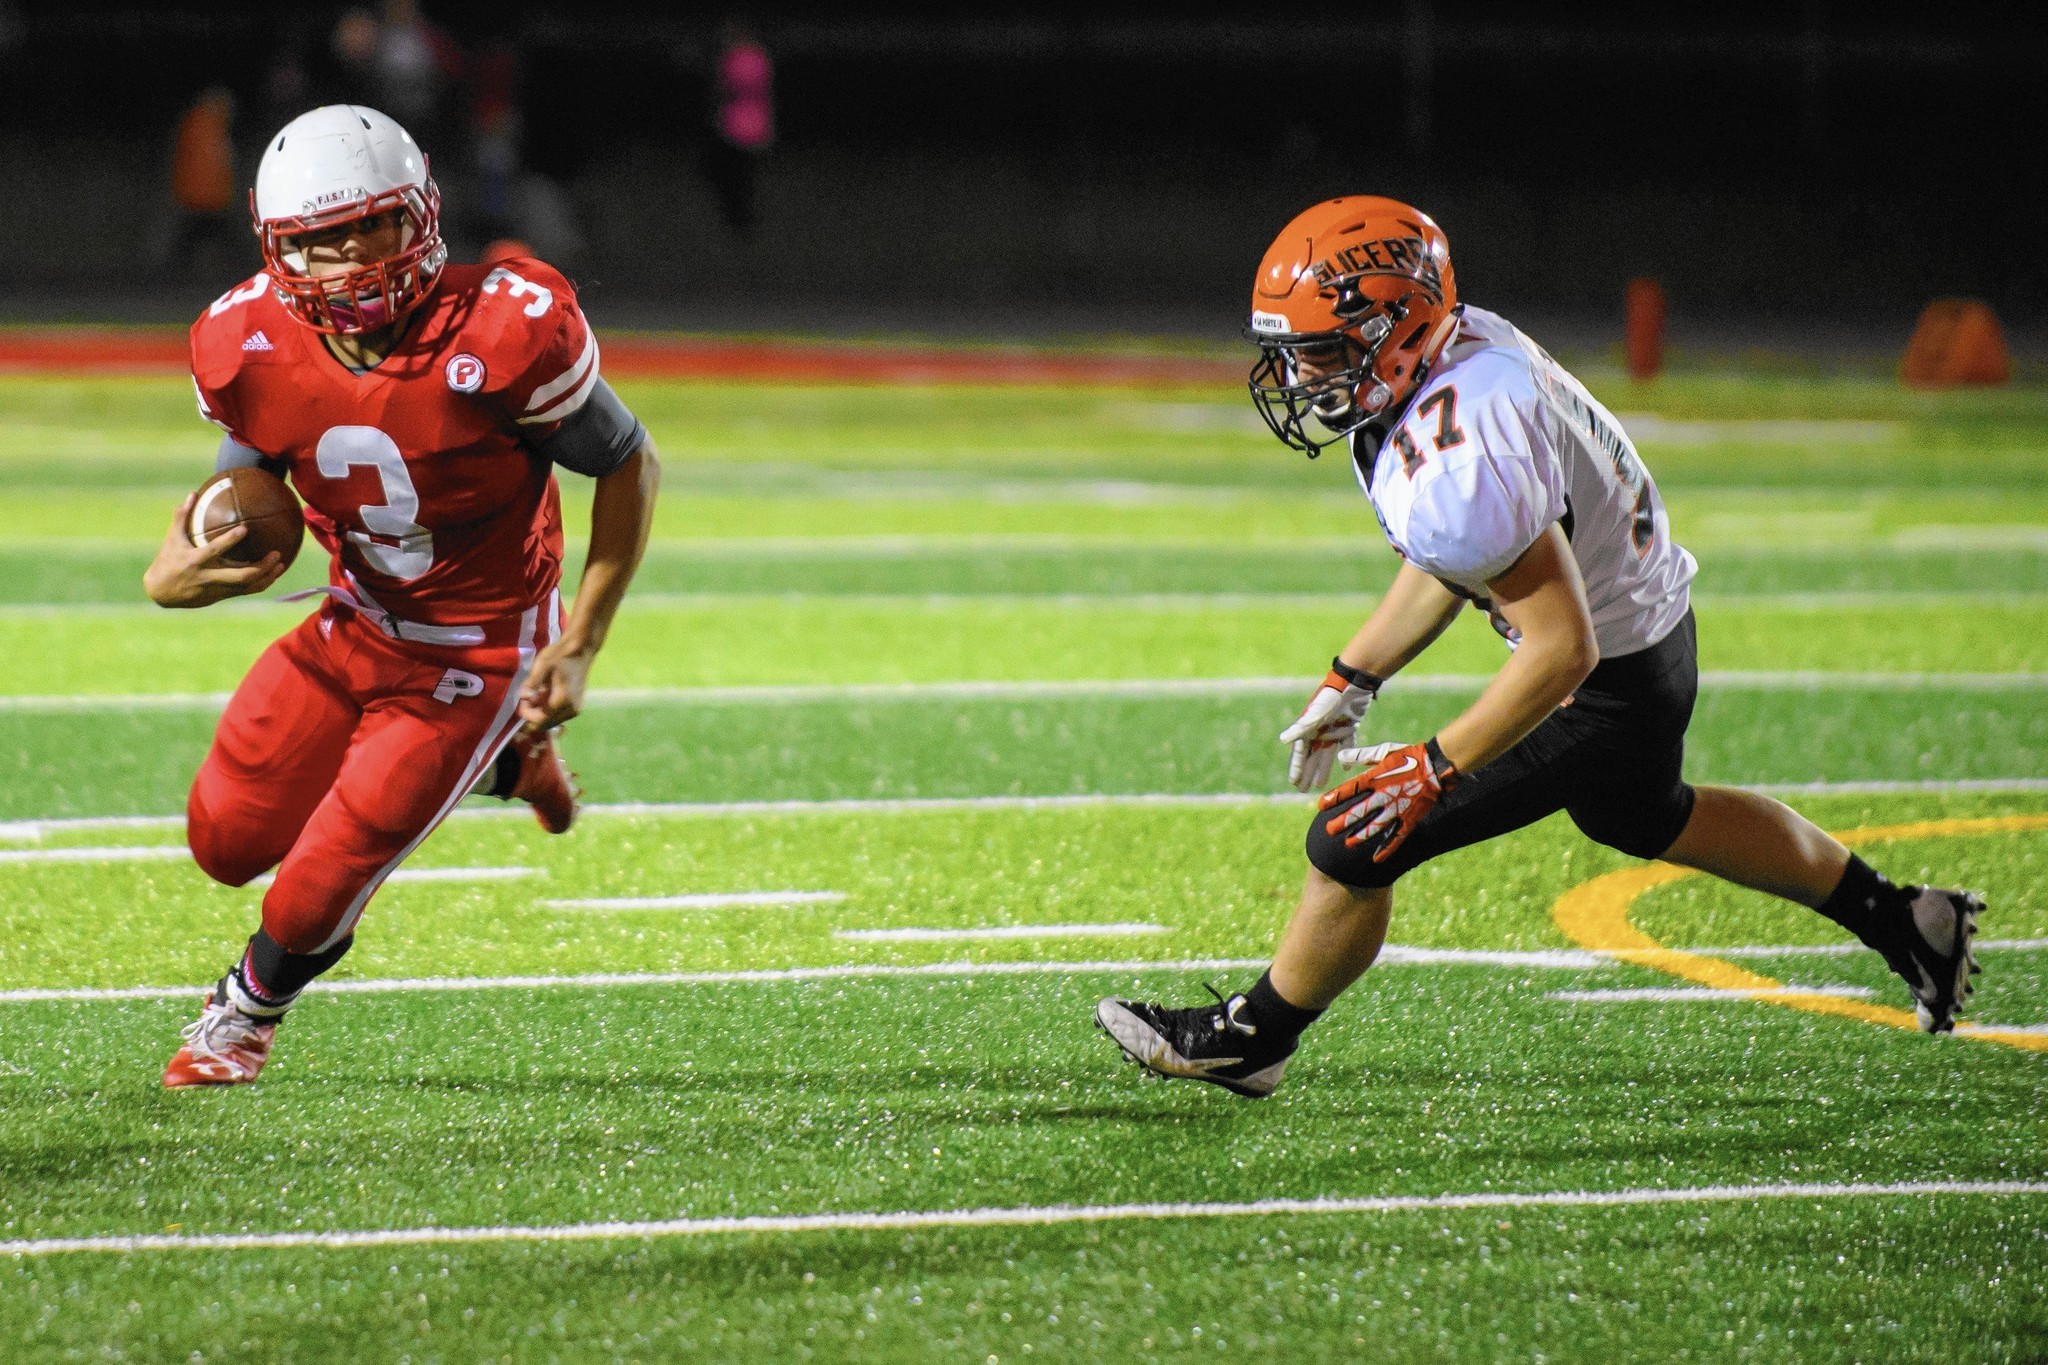 Anthony Maceo leads Portage into first-round playoff game against ... - Chicago Tribune